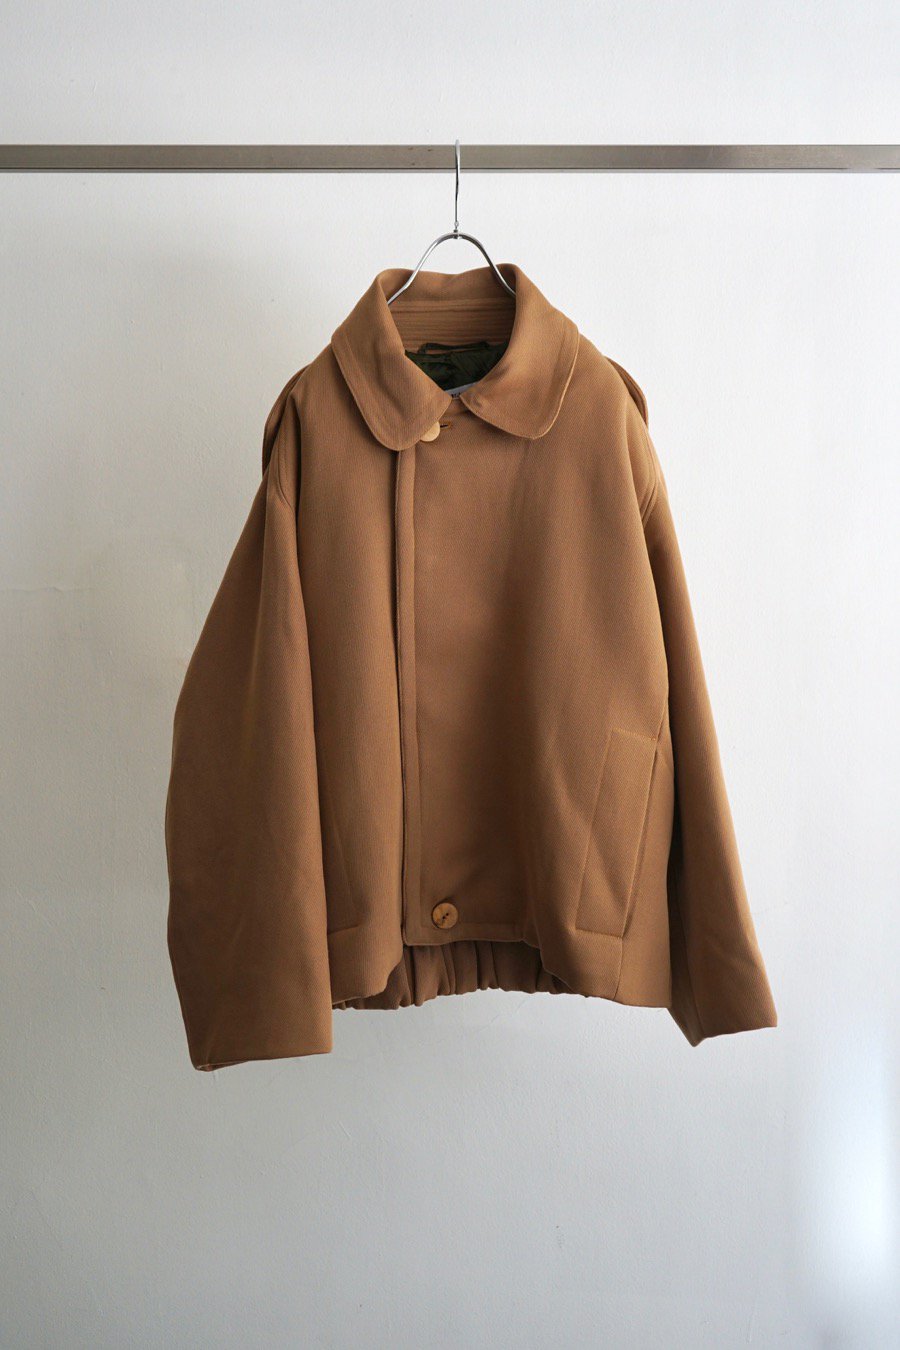 MAI GIDAH / Short jacket with standing back-panel,elasticated back and buttonplacket / Brown sugar